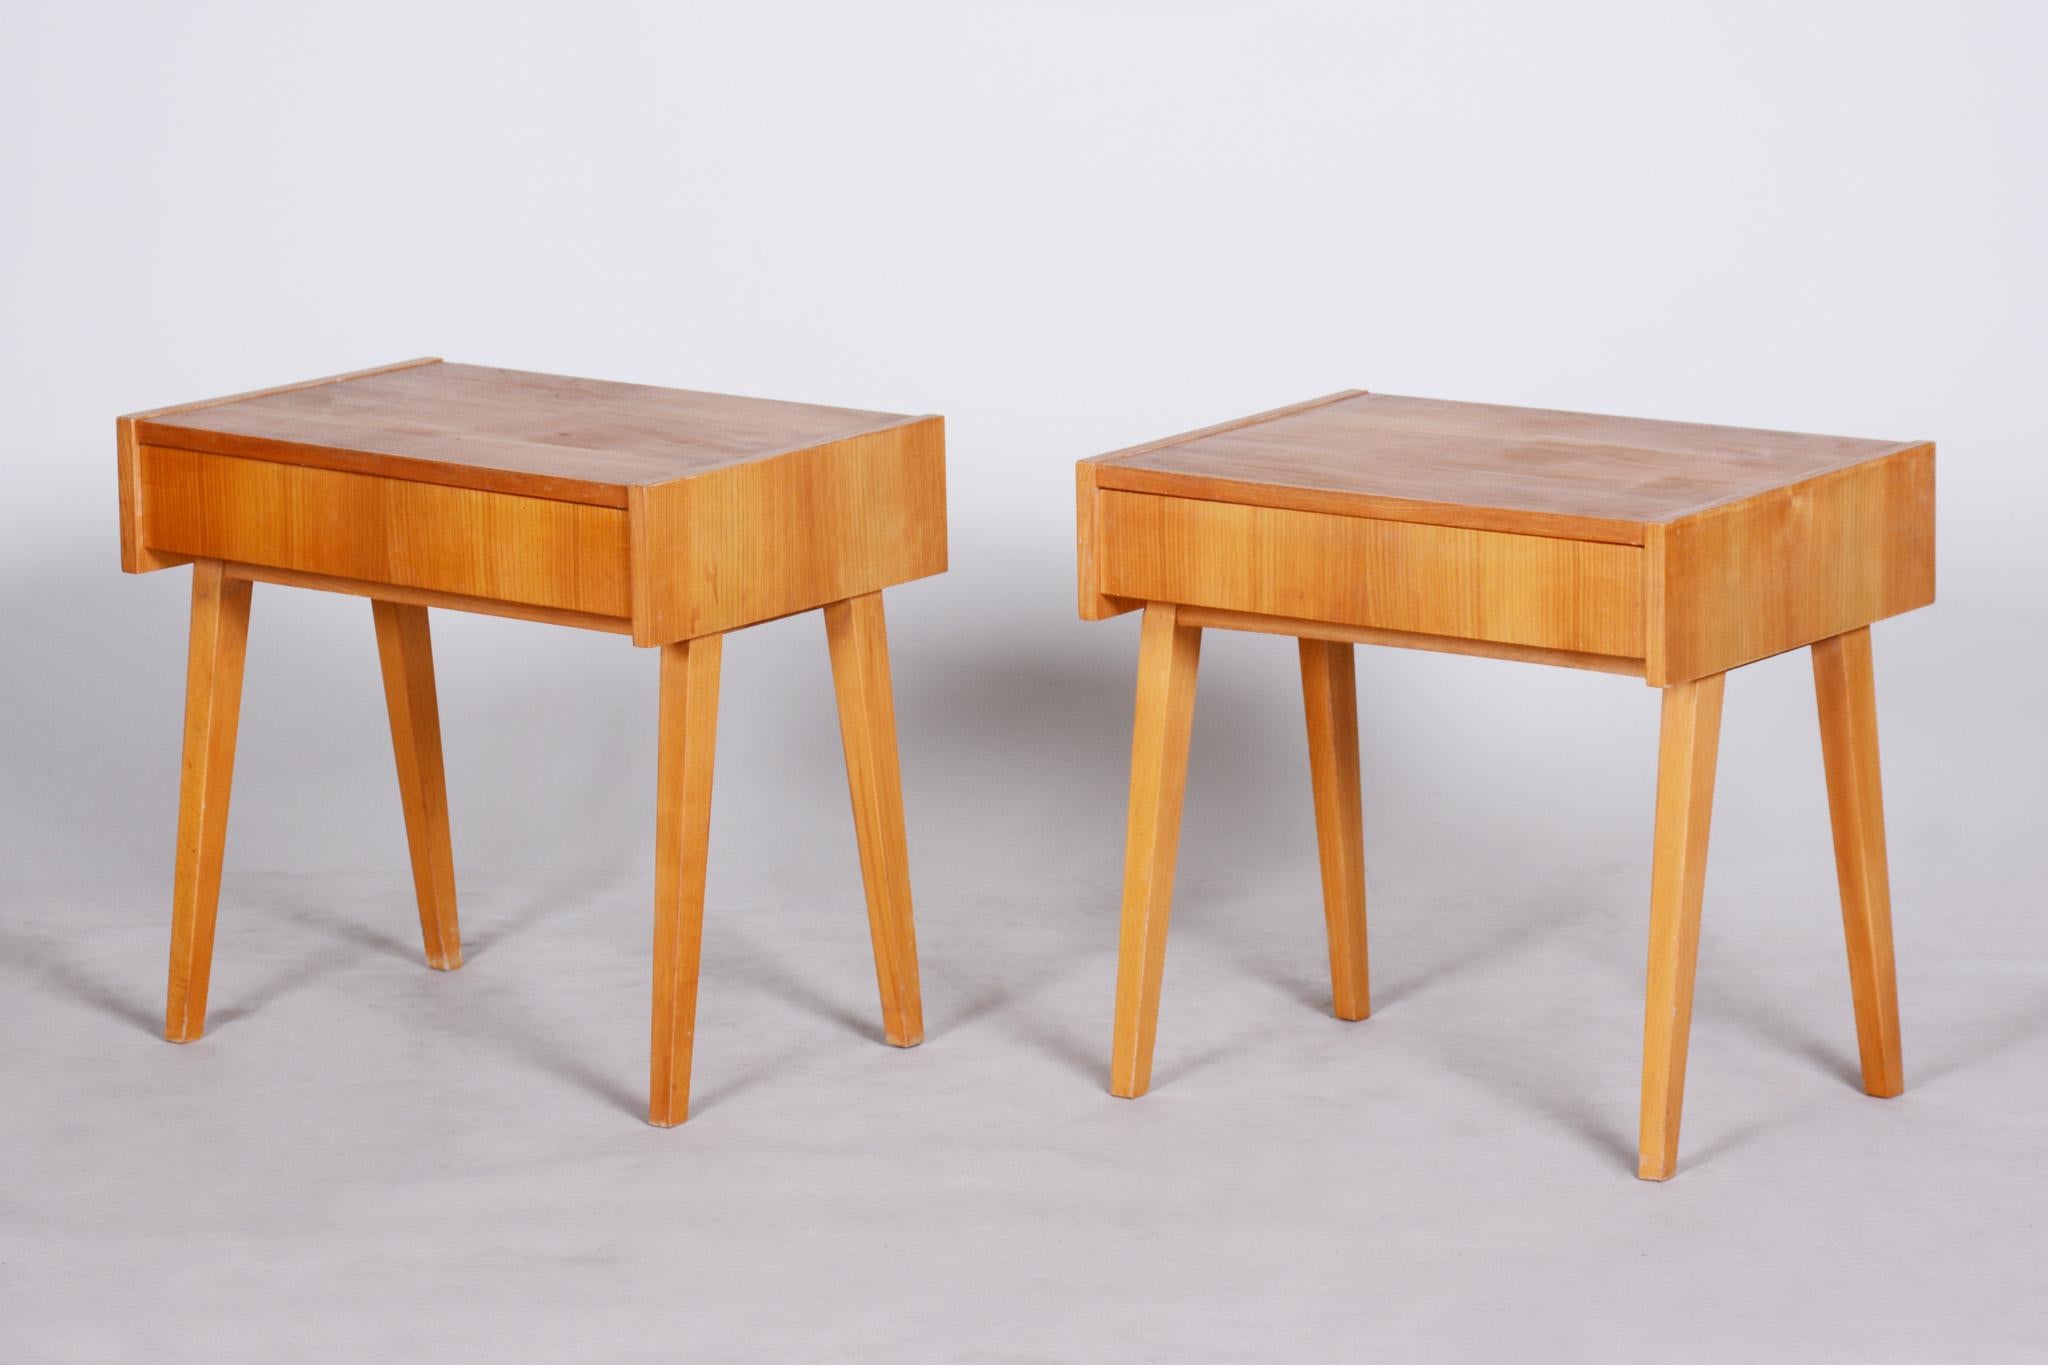 20th Century Pair of Ash Brown Midcentury Modeern Bedside Tables Made in Czechia, 1950s